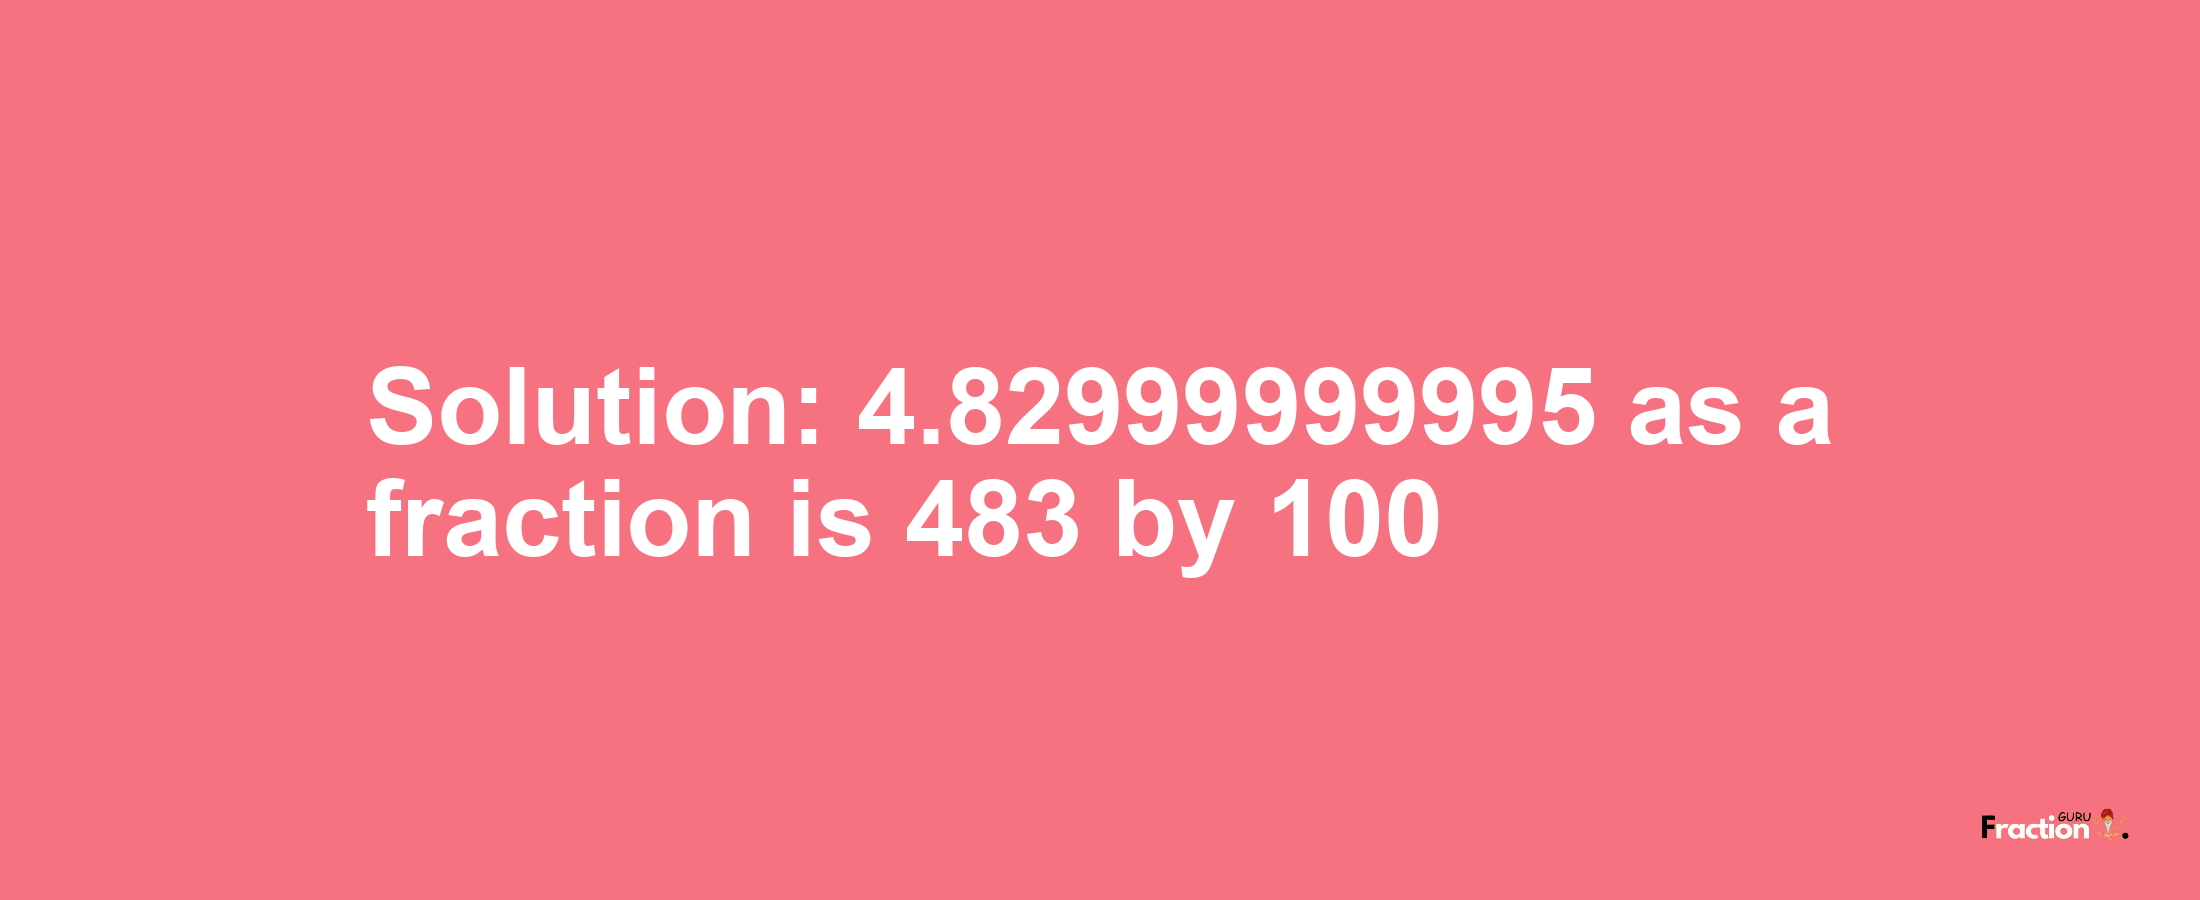 Solution:4.82999999995 as a fraction is 483/100